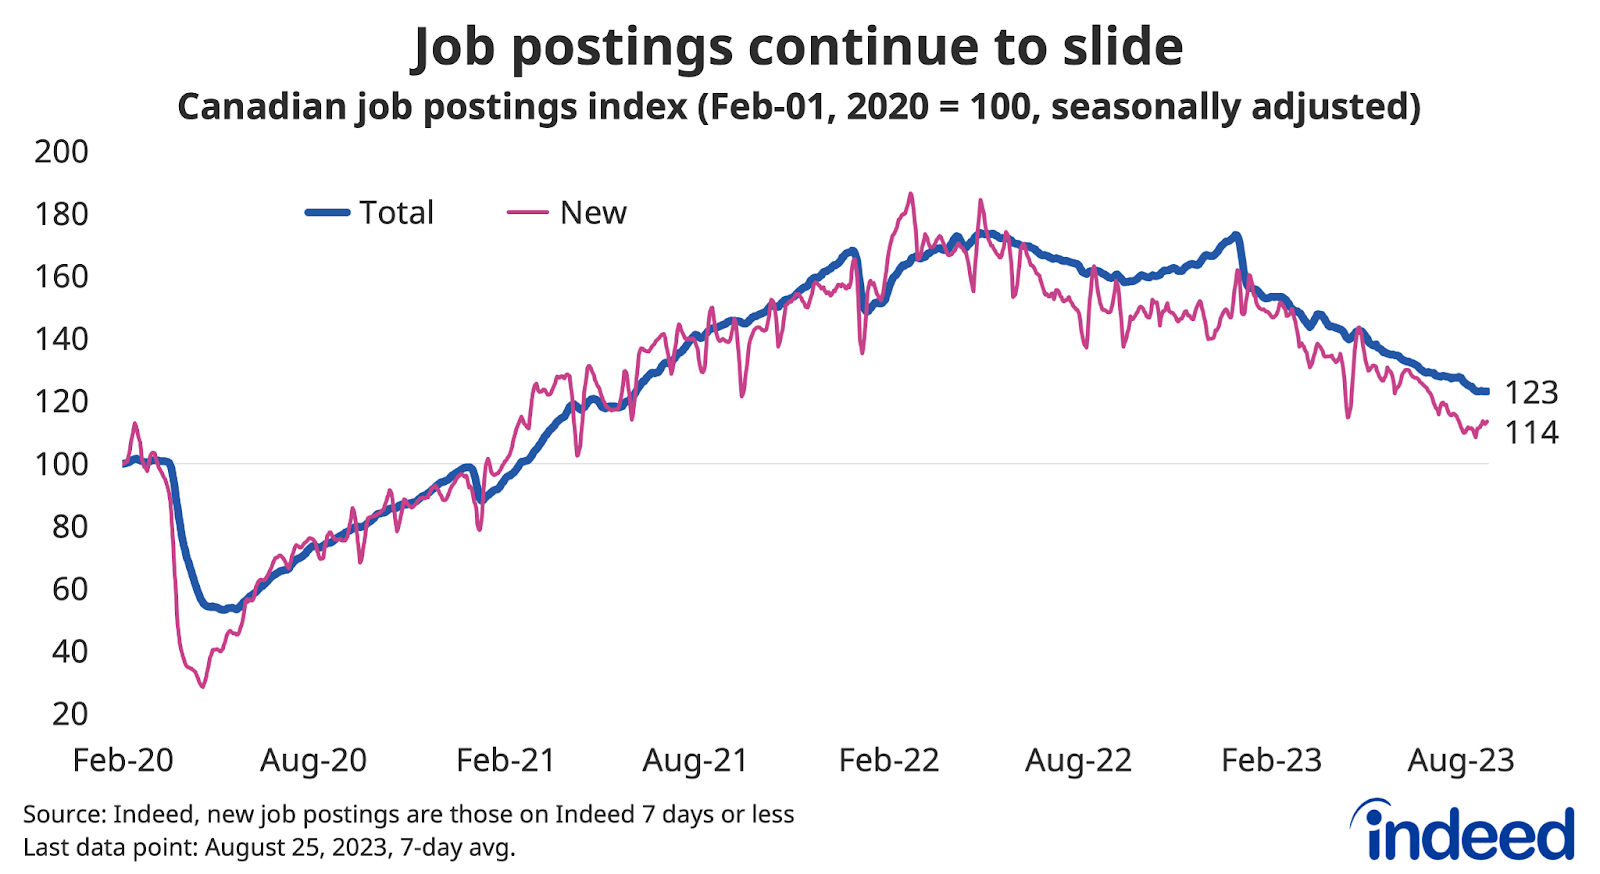 Line graph titled “Job postings continue to slide,” shows the path of Canadian total and new job postings from February 1, 2020 to March 31, 2023, with both series indexed to 100 on February 1, 2020. As of August 25, total job postings were still up 23% from February 2020, but had slipped 23% from a year earlier. 